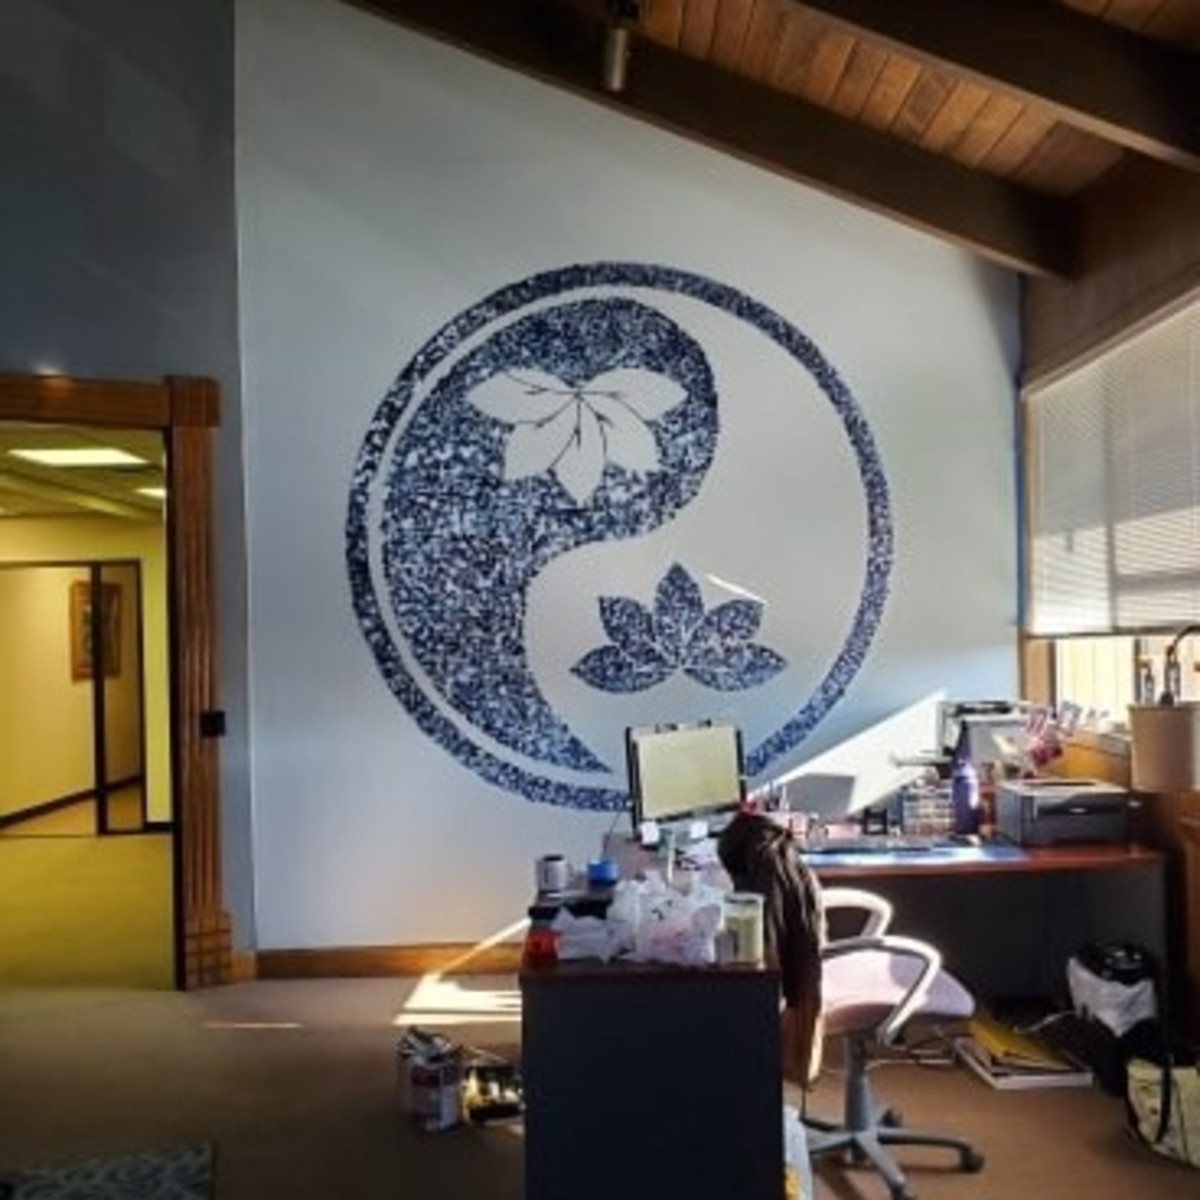 Her nice bigger office. Ying-Yang mural was done by HER.